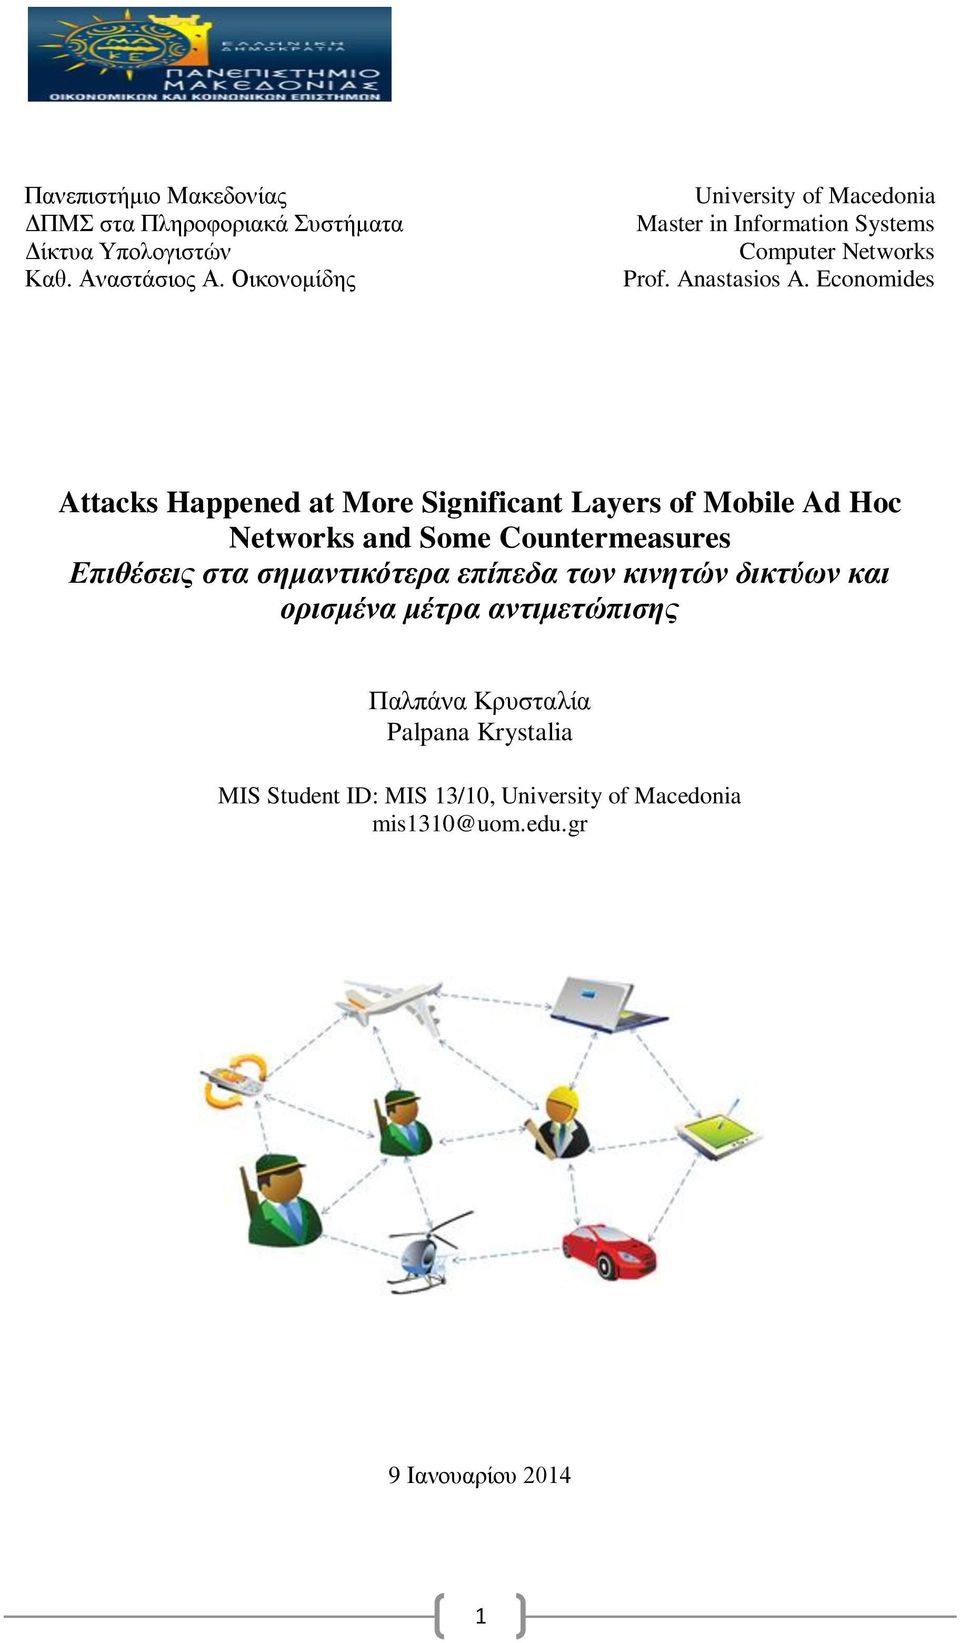 Economides Attacks Happened at More Significant Layers of Mobile Ad Hoc Networks and Some Countermeasures Επιθέσεις στα